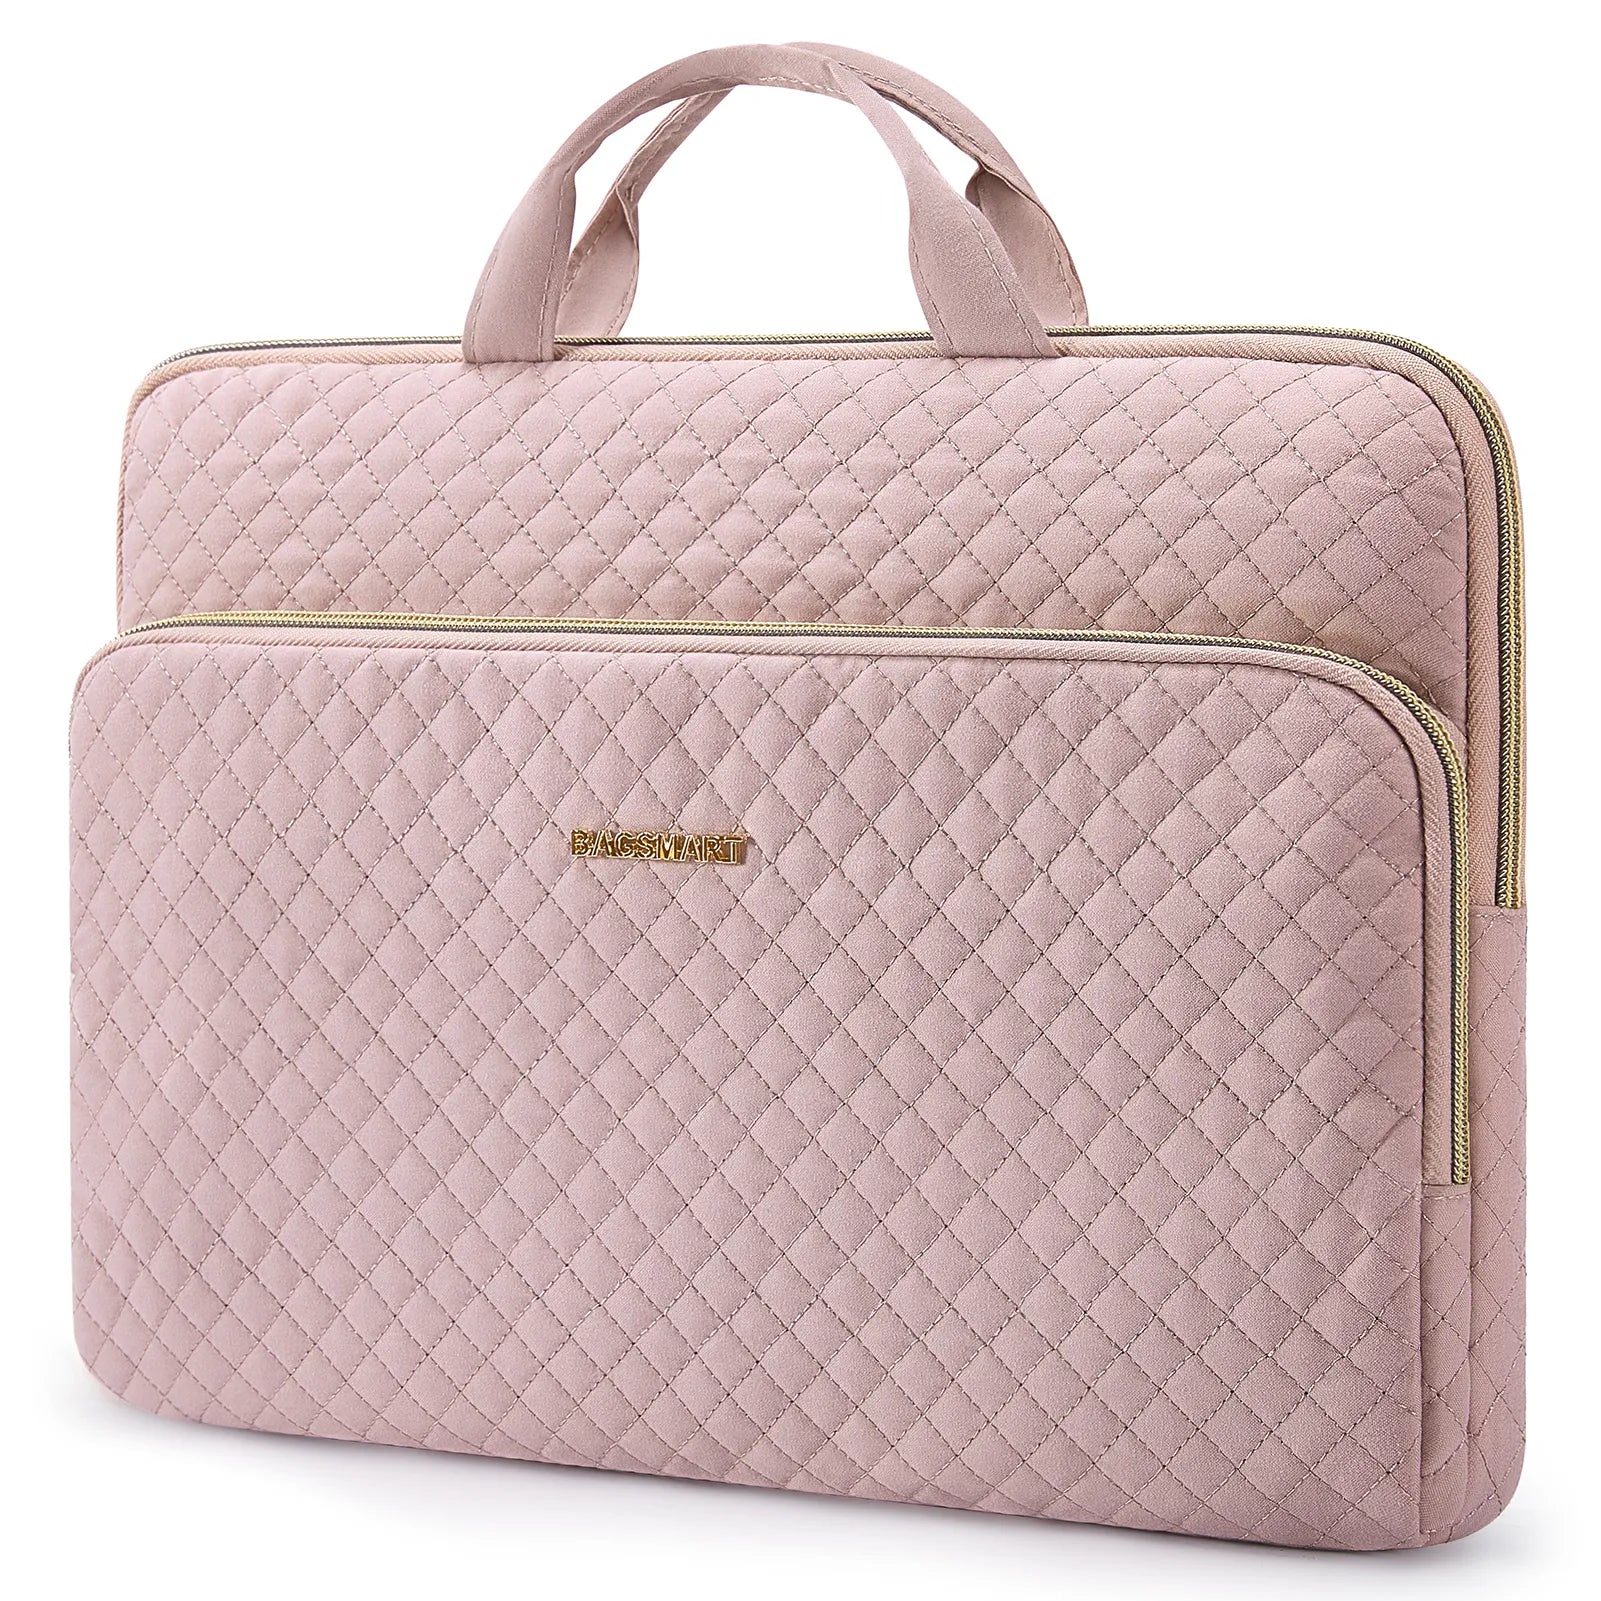 Laptop Bag for Women: Sleeve Case, Computer Handbag 13.3-15.6 inch, Briefcases for MacBook Air/Pro 13-14 Pink / for 15inch laptop / CHINA